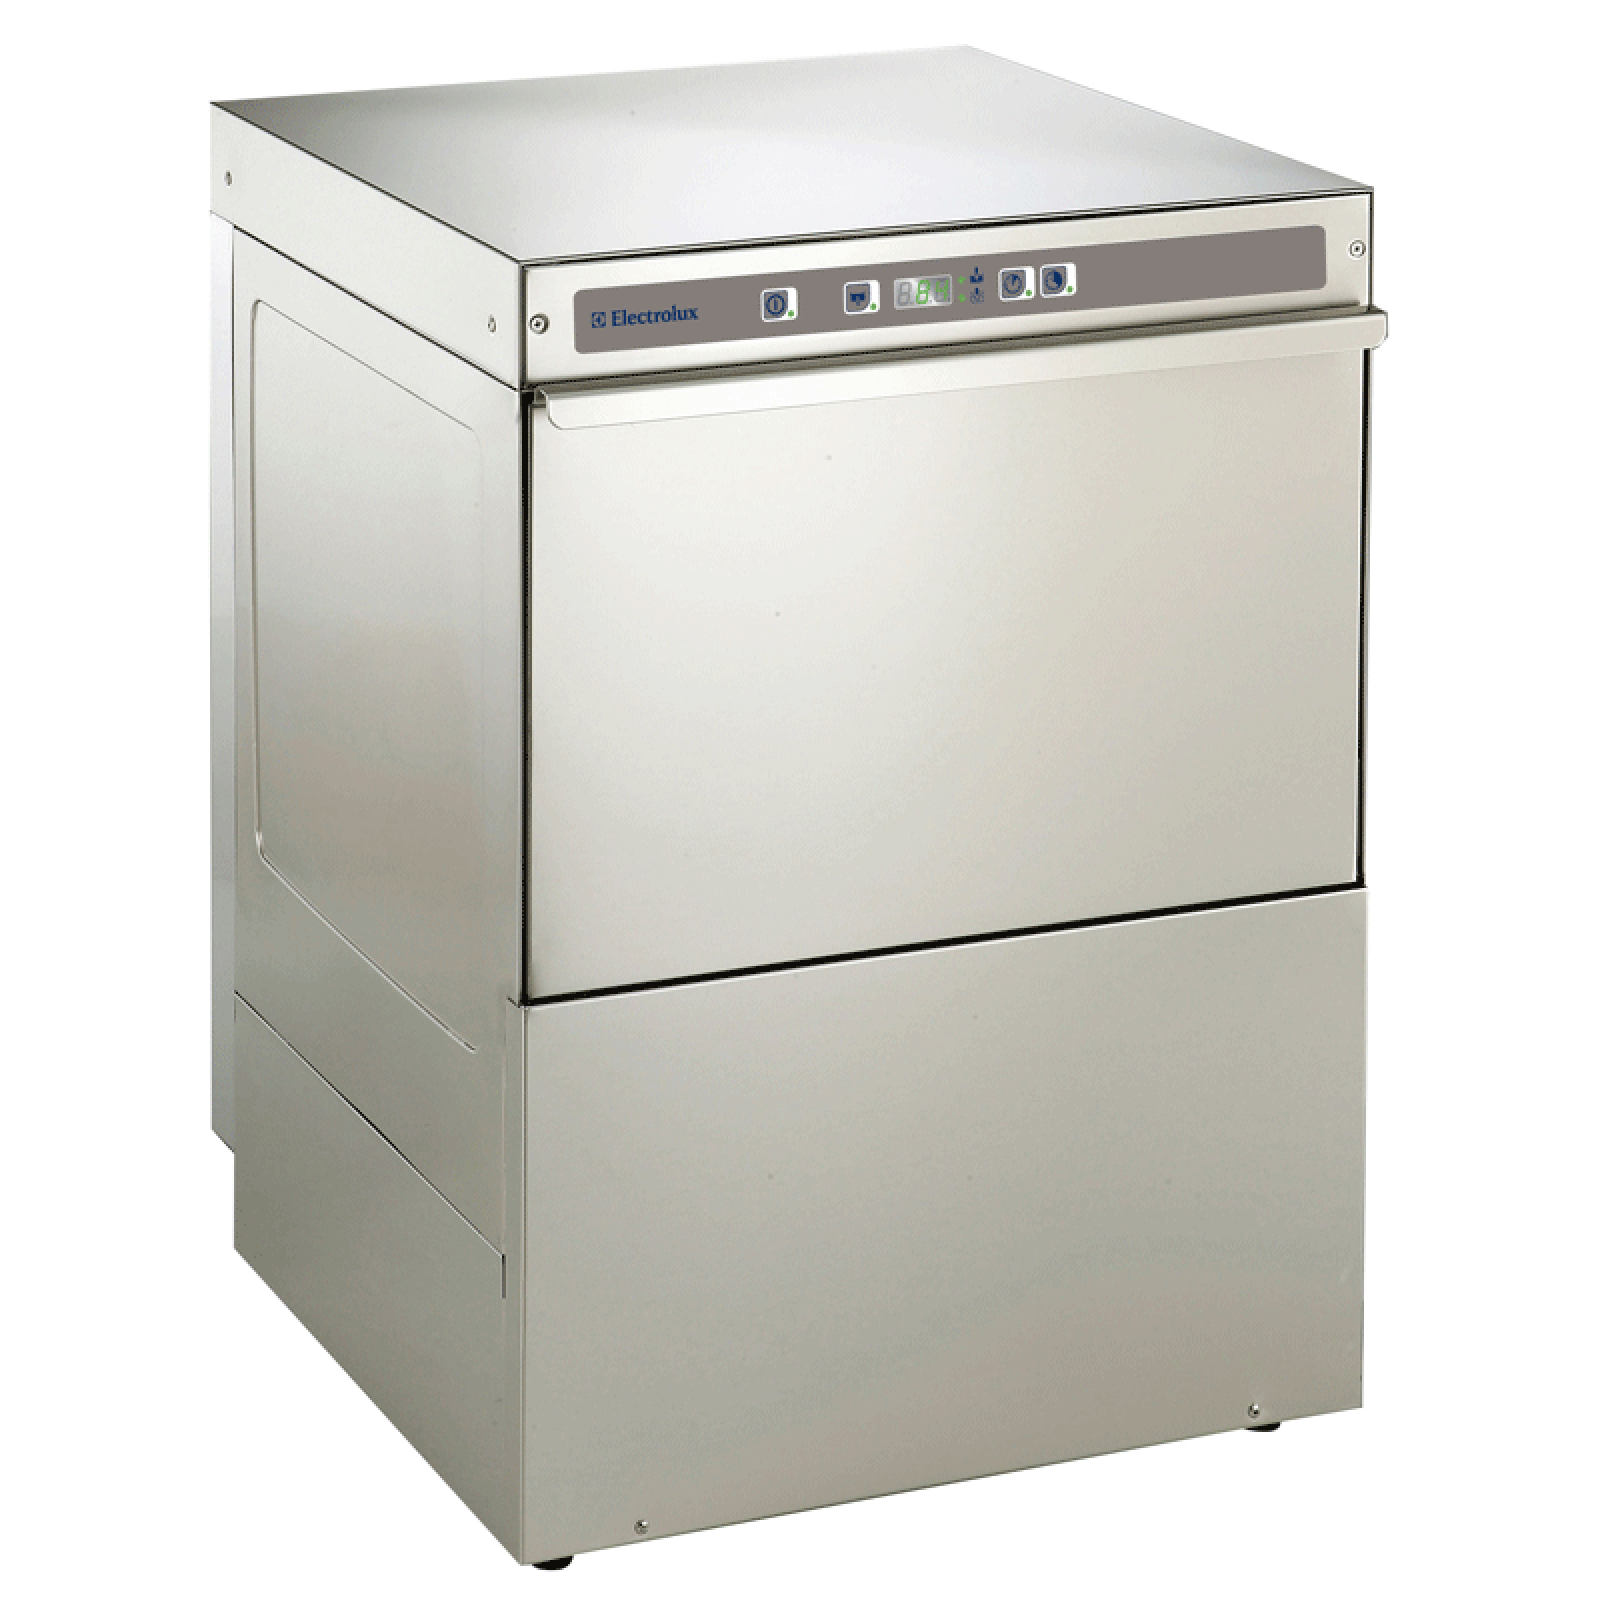 Electrolux Commercial Under Counter Dishwasher Total Commercial Equipment